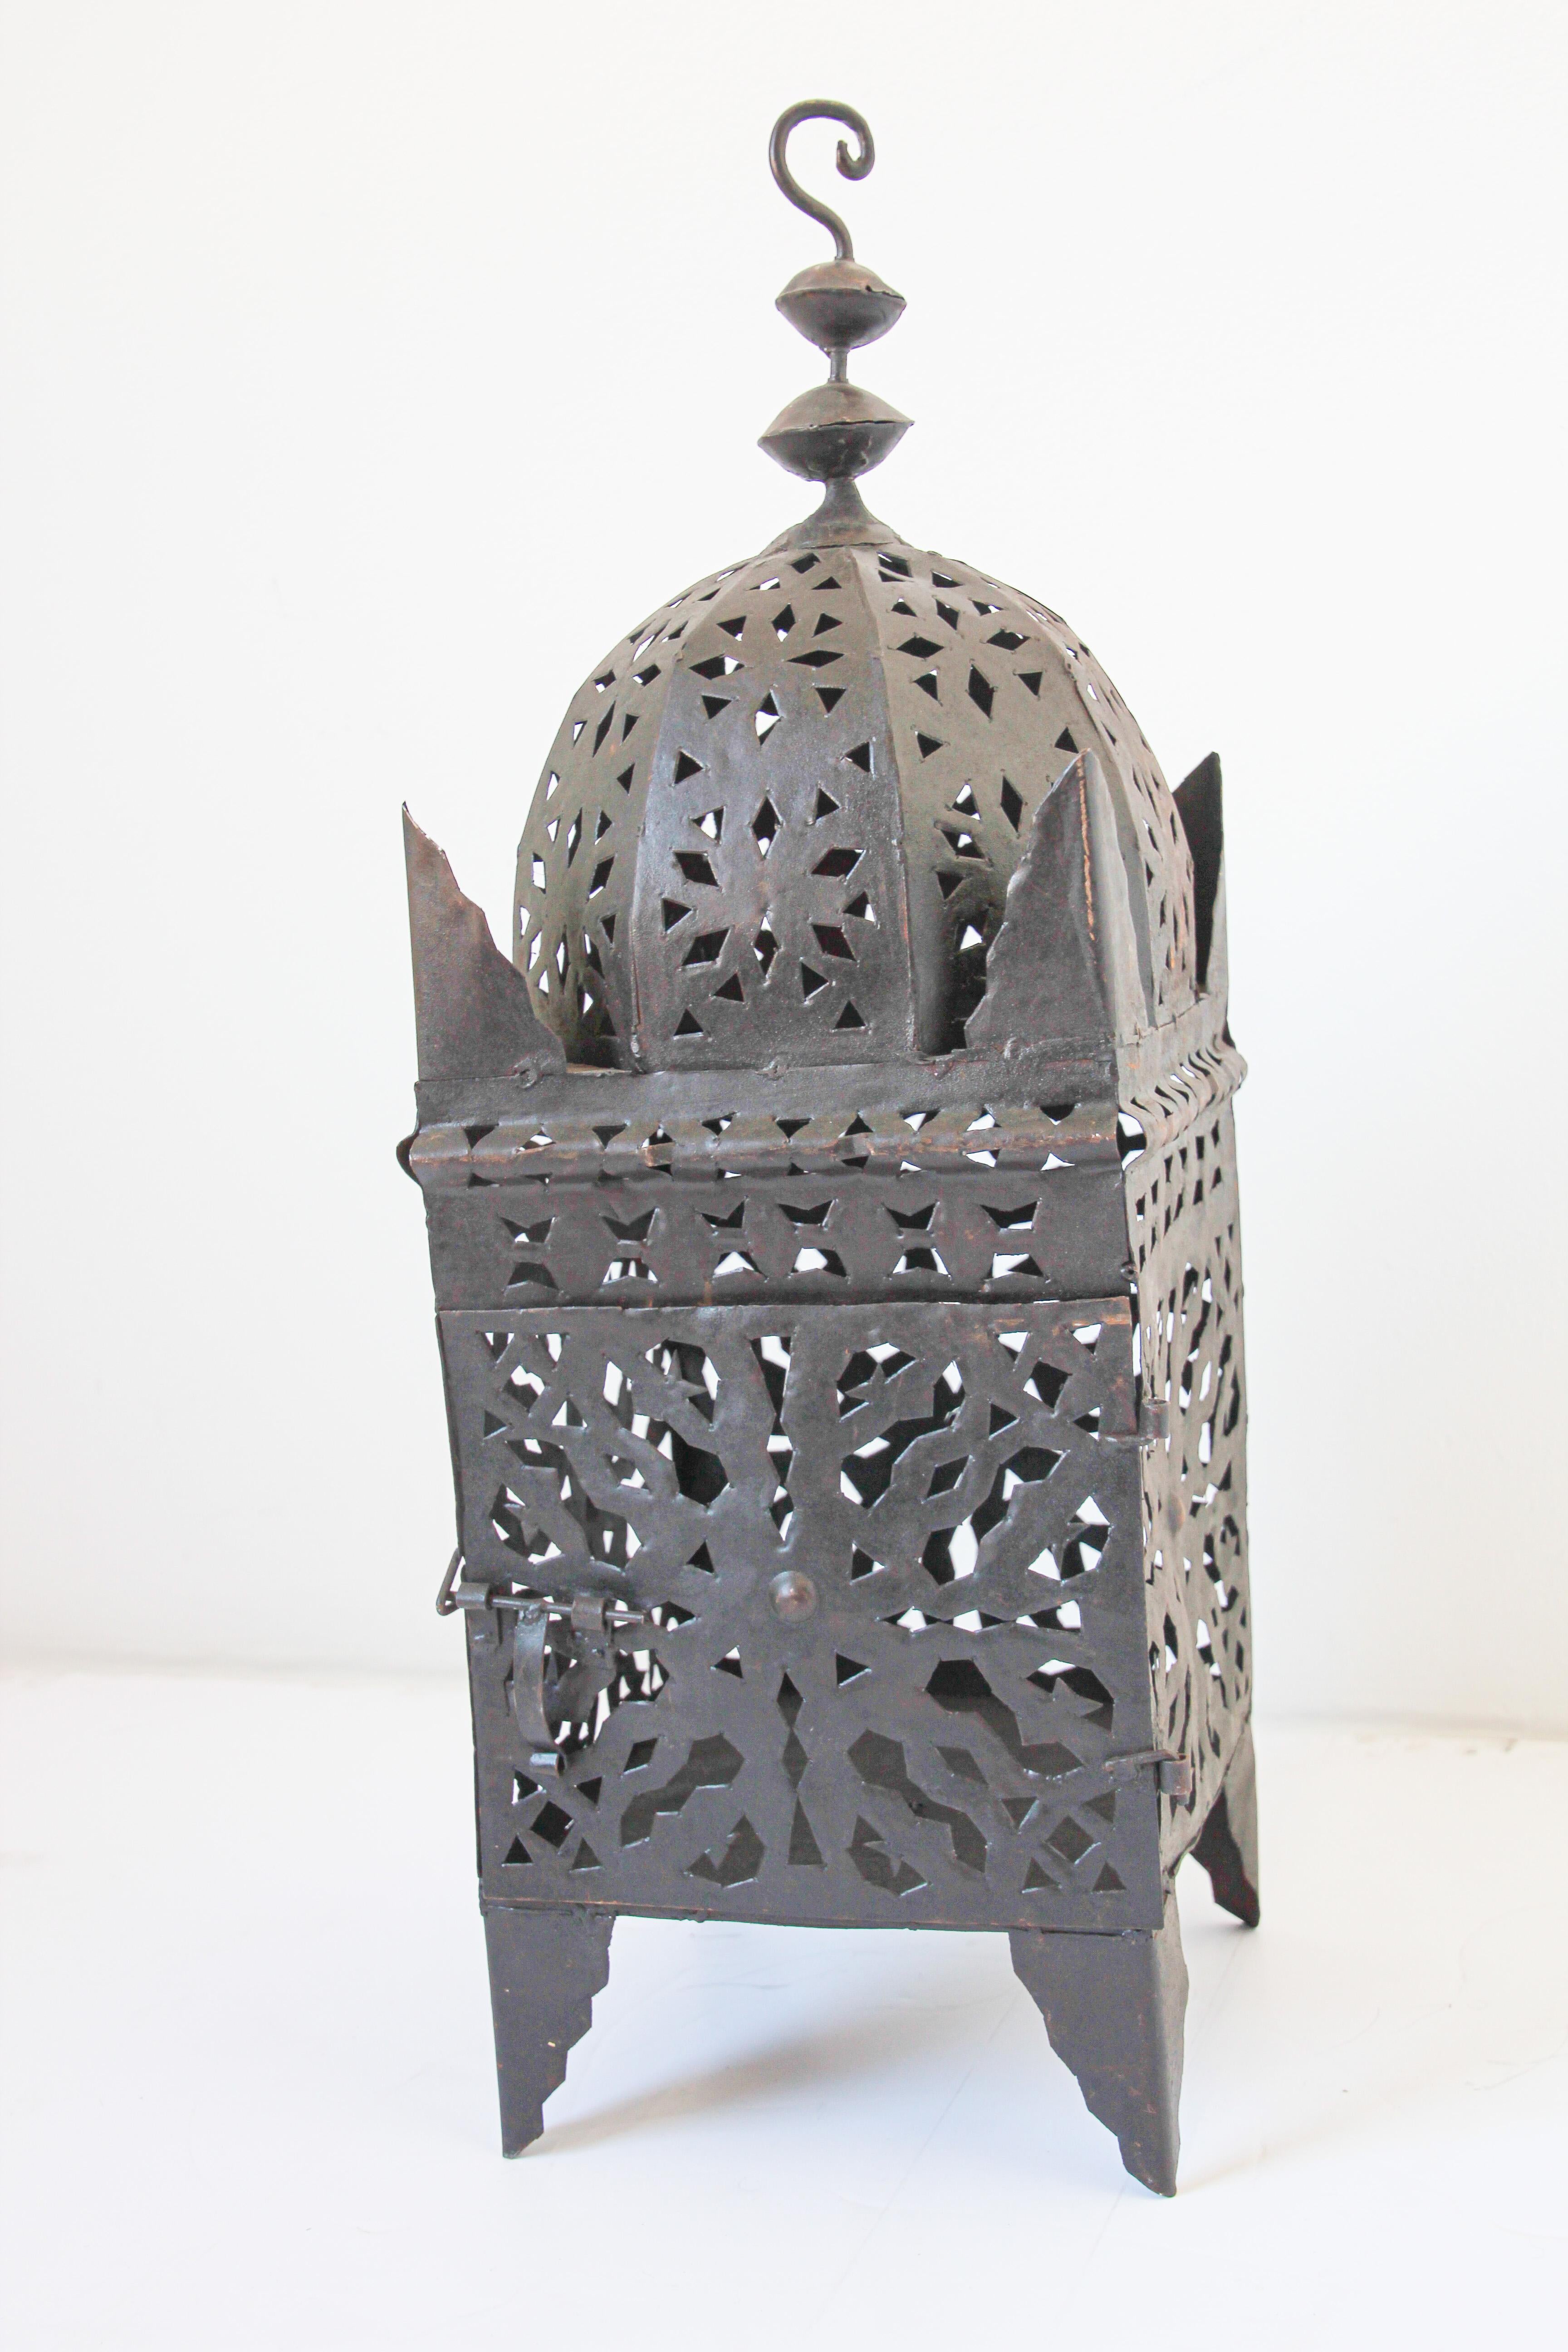 Large Moroccan Moorish Hurricane Metal Candle Lantern In Good Condition For Sale In North Hollywood, CA